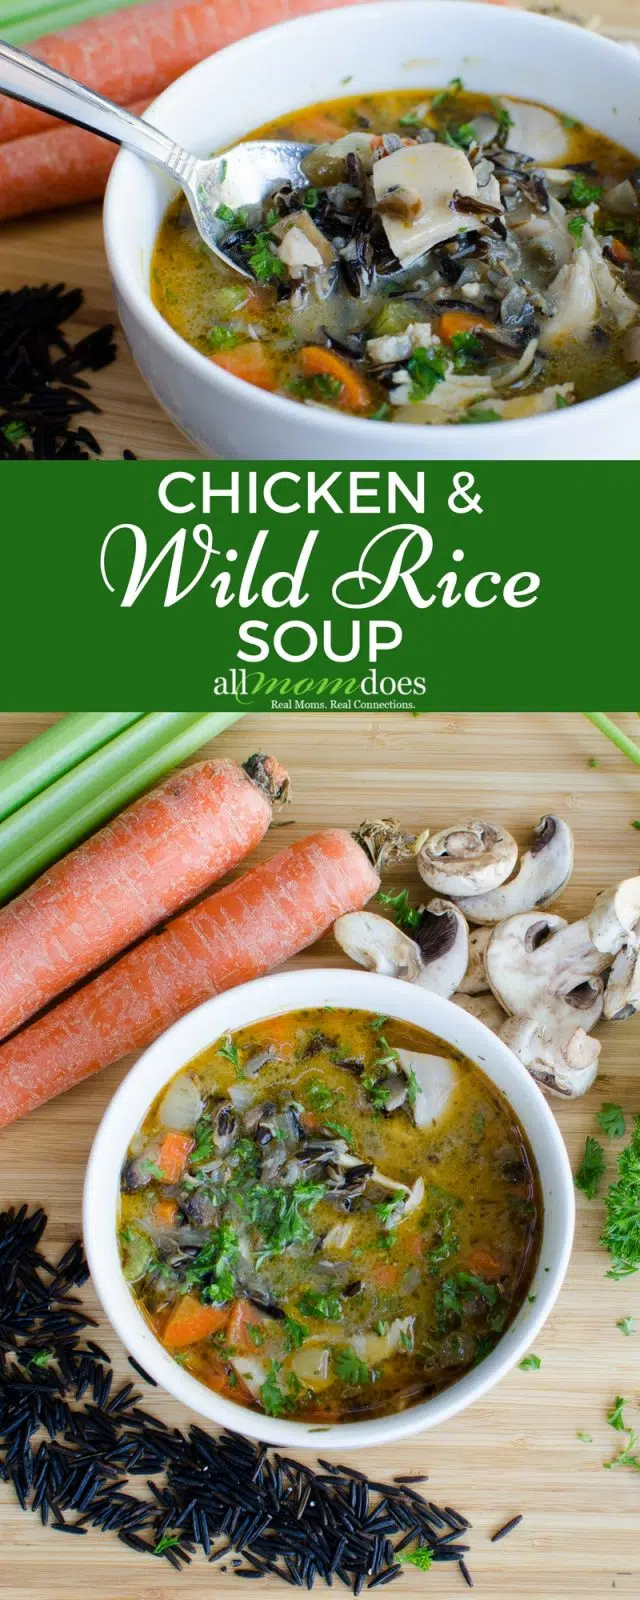 Homemade Chicken and Wild Rice Soup Recipe #wildrice #chickensoup